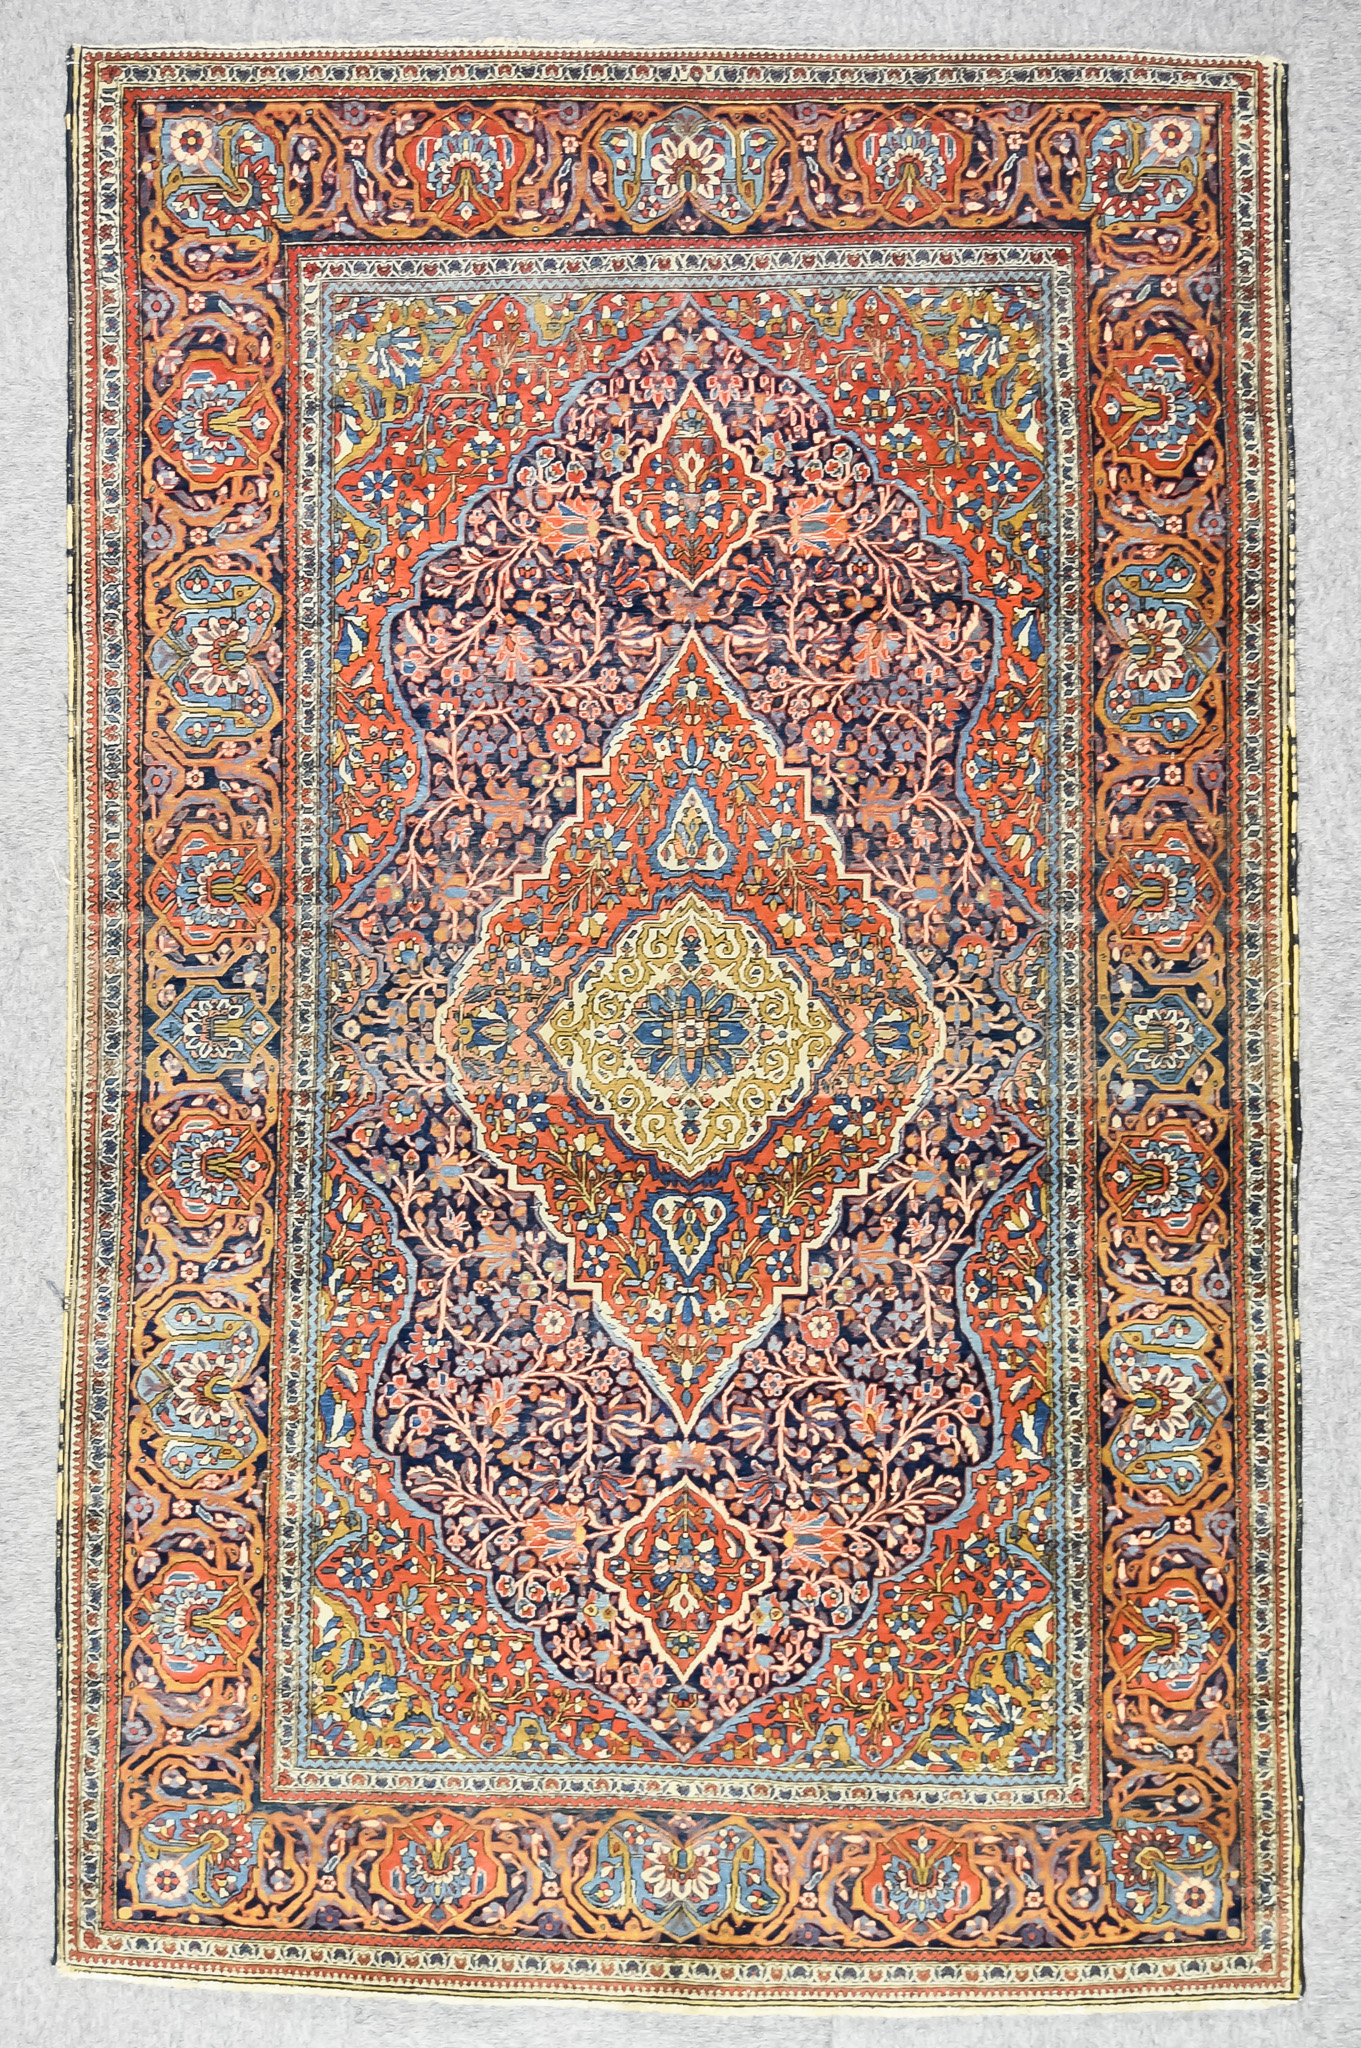 An Antique Kirman Rug, woven in colours of navy blue, terracotta, fawn and ivory, the bold central